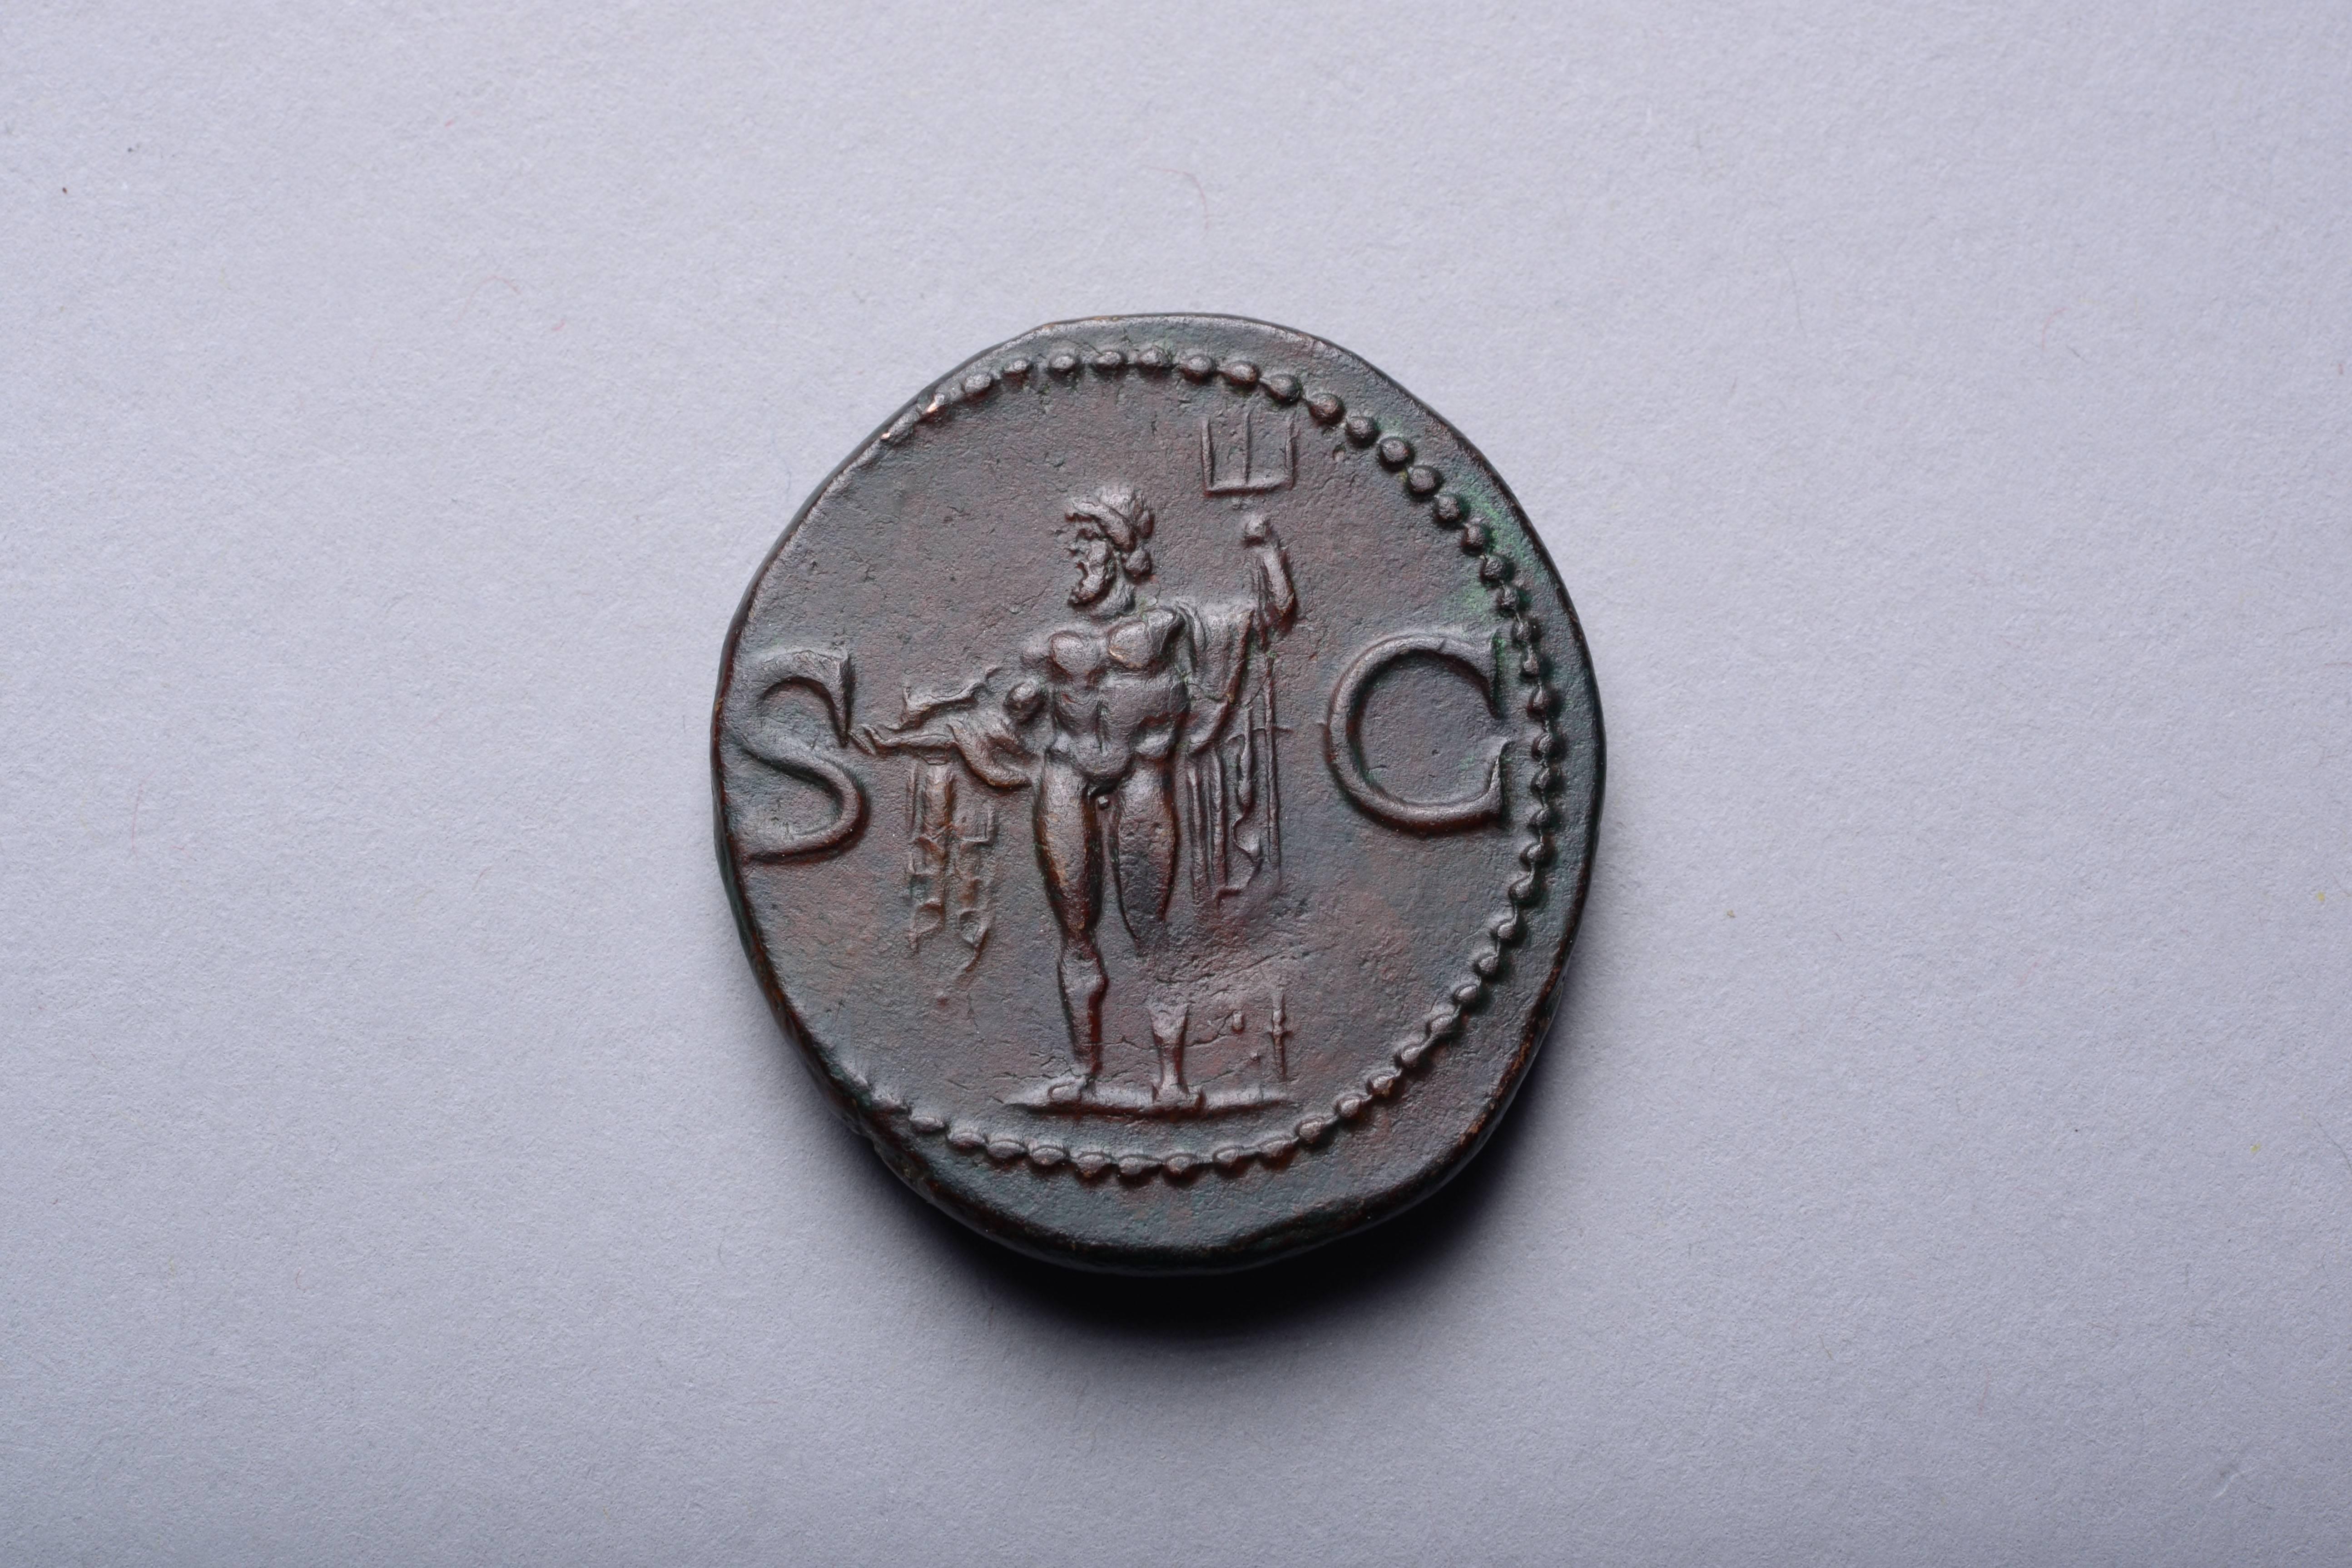 A superb ancient Roman bronze As minted under Emperor Caligula, to commemorate the great statesman and general Agrippa. Struck at the Rome mint, circa 37 - 41 AD.

The obverse with a magnificent portrait of one of early Imperial Rome's most